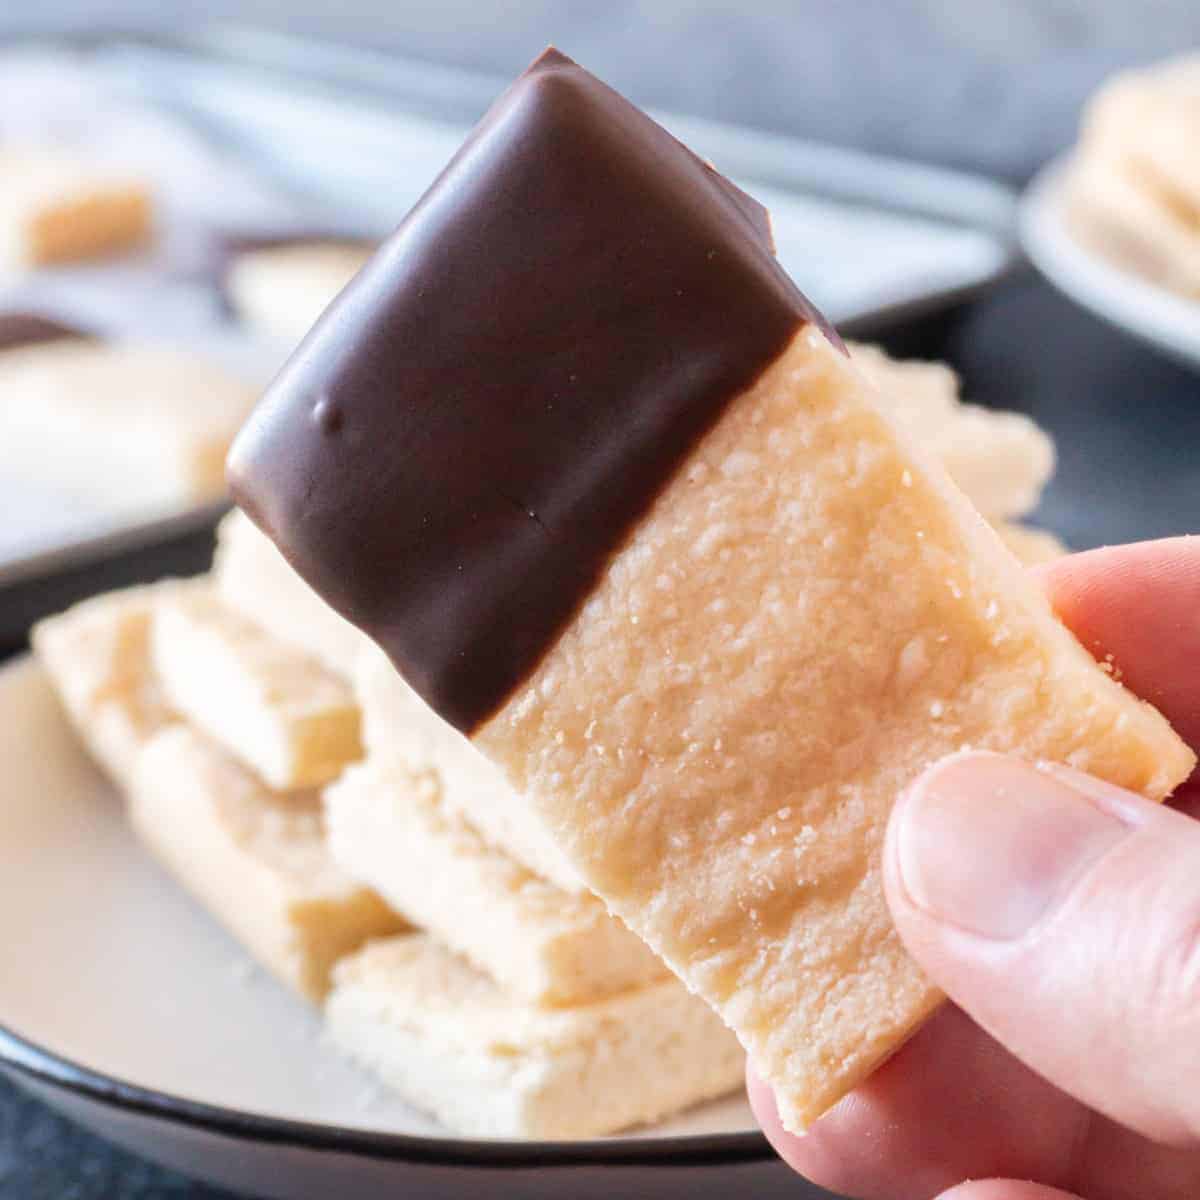 holding a chocolate dipped shortbread cookie featured image